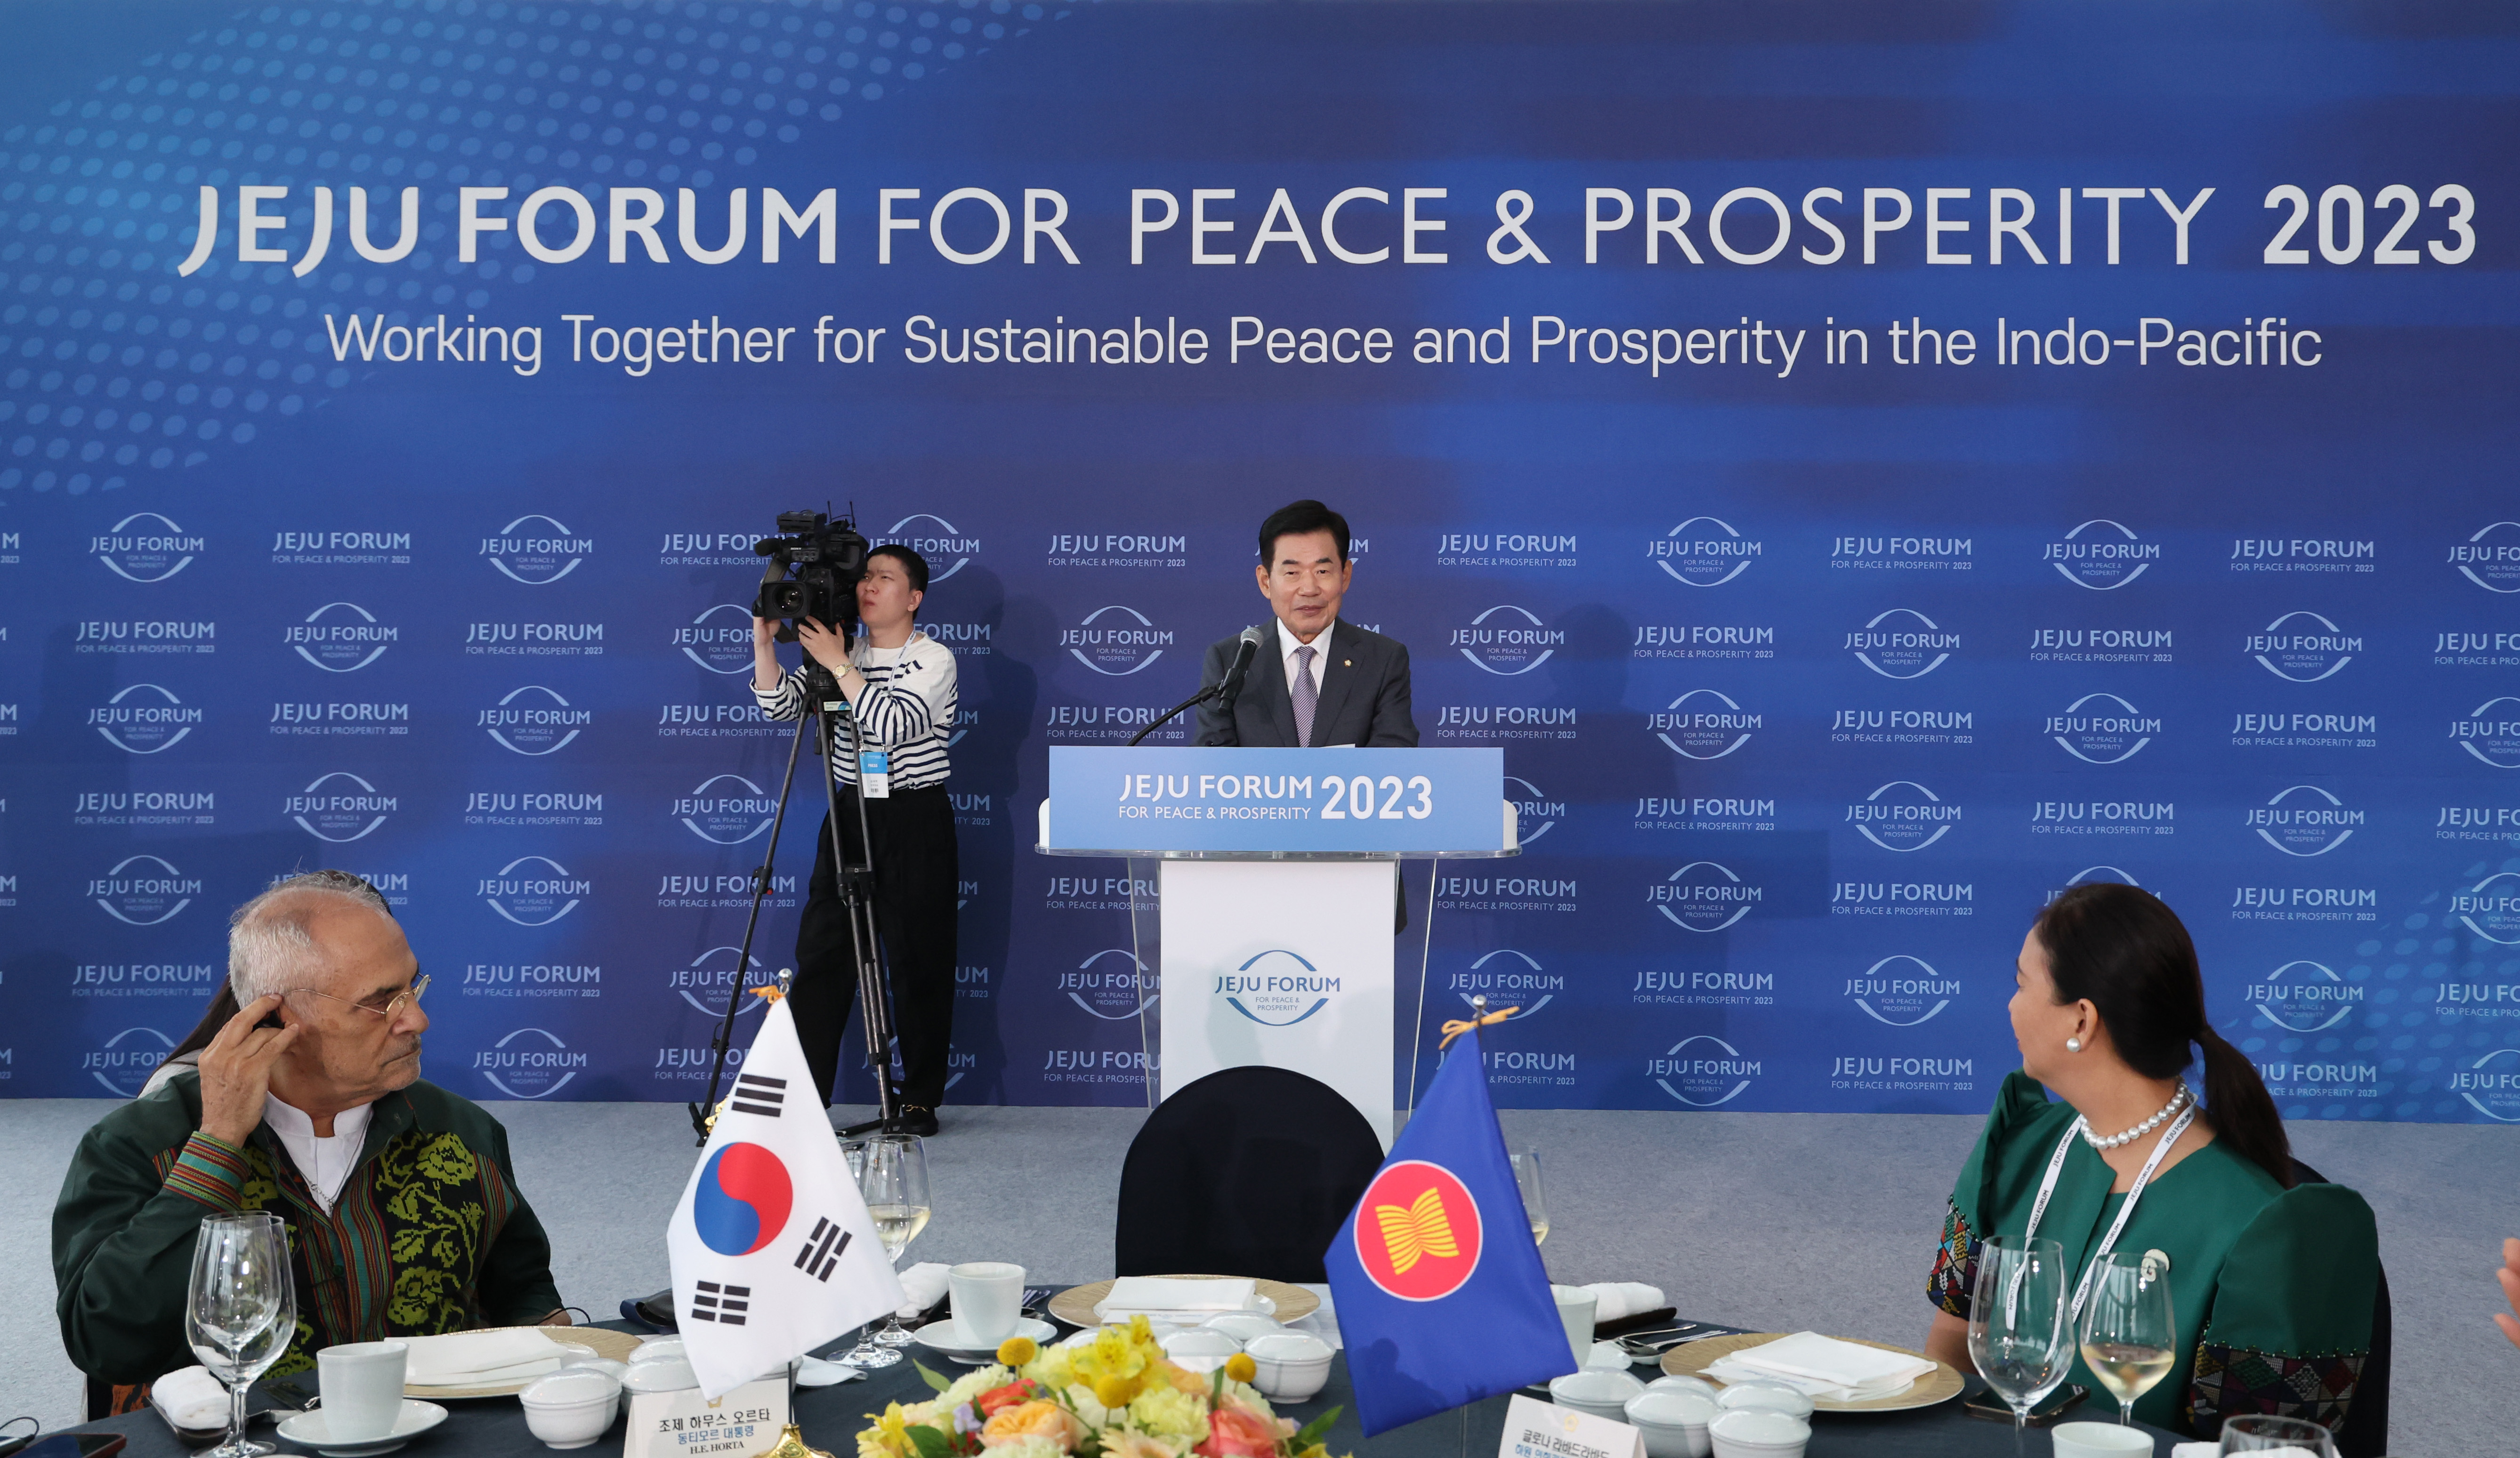 Speaker attends Jeju Forum 2023, presides over luncheon (2) 관련사진 1 보기